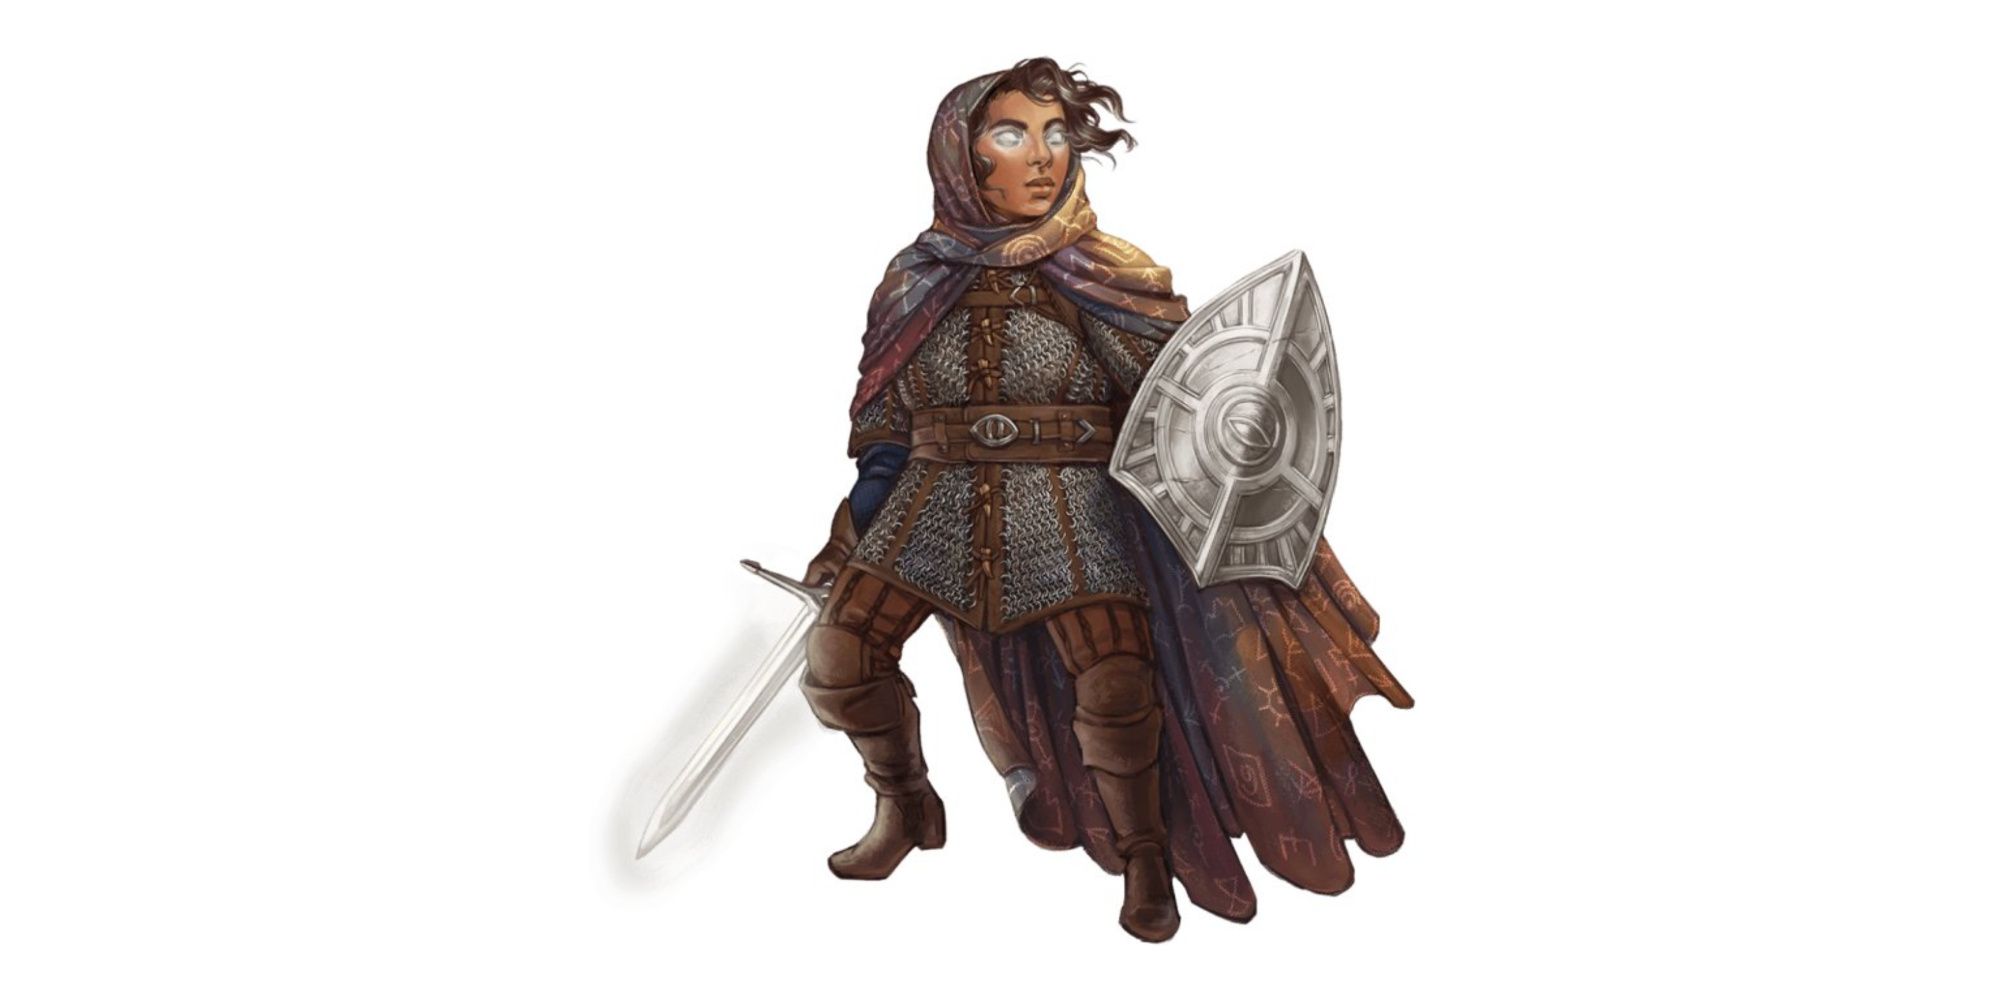 Dwarf Paladin of the Watcher by Anna Veltkamp holding a sword and shield from Tasha's Cauldron of Everything